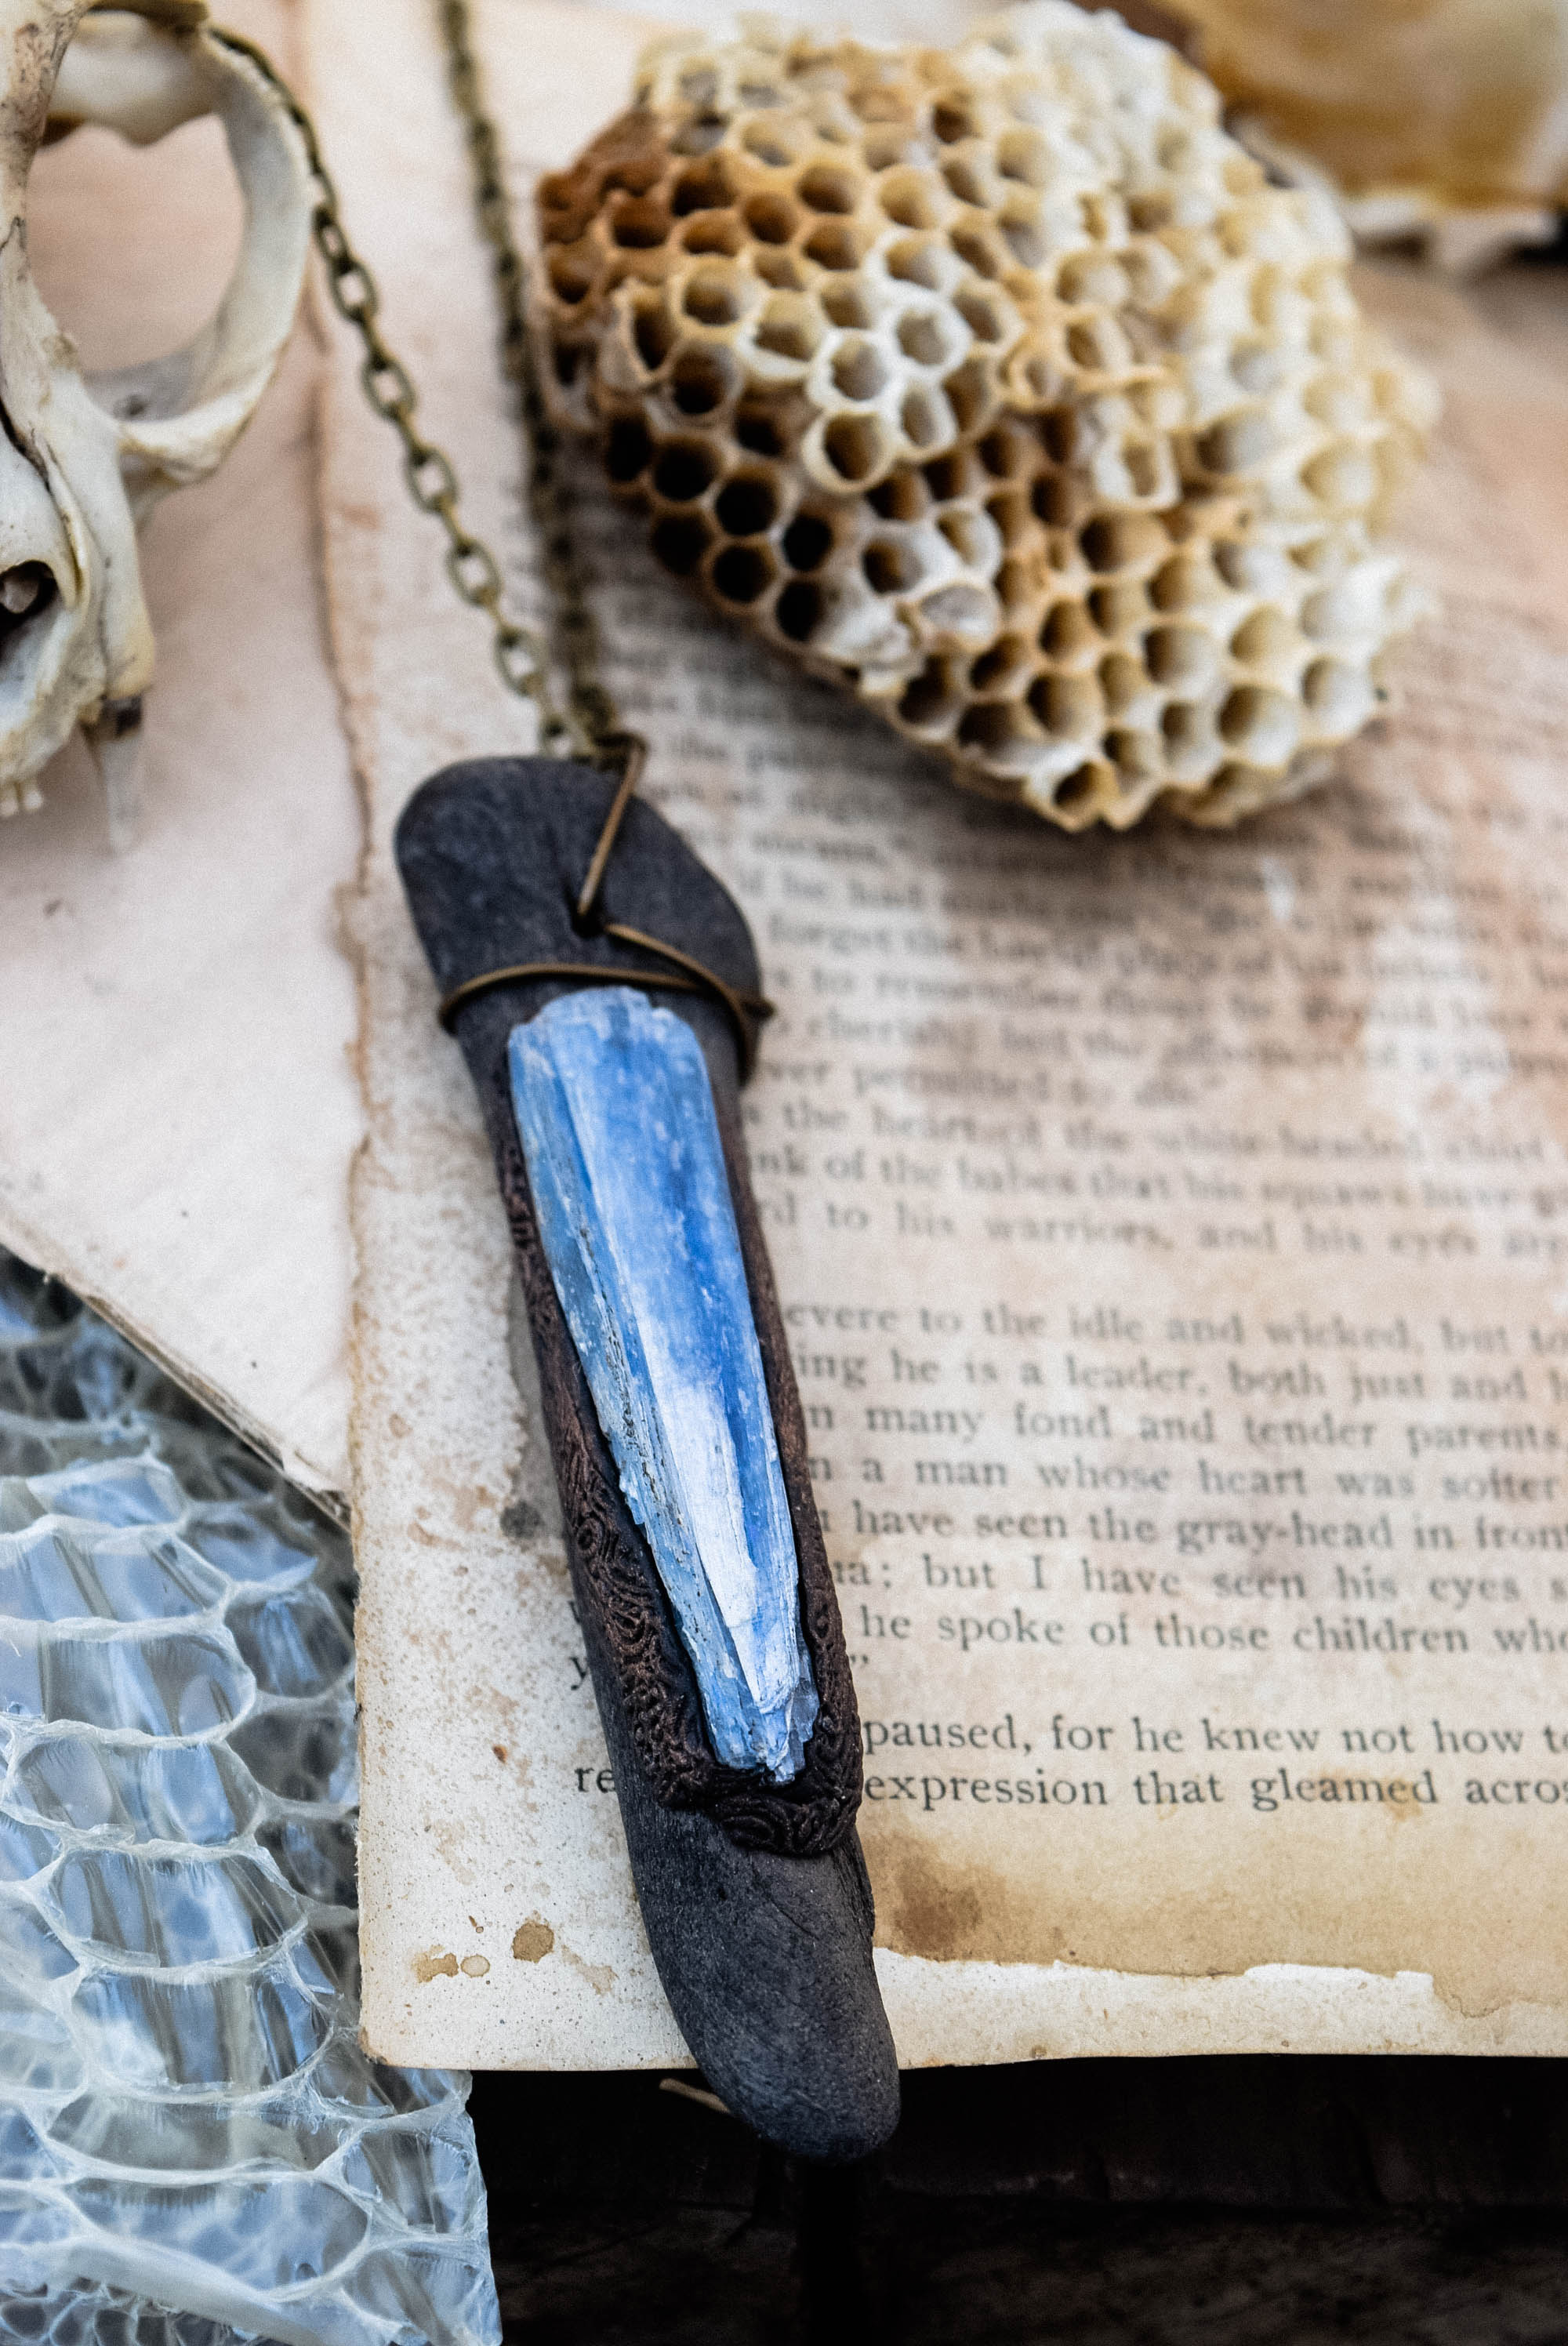 Driftwood Necklace with Blue Kyanite to Clear Fears and Blockages